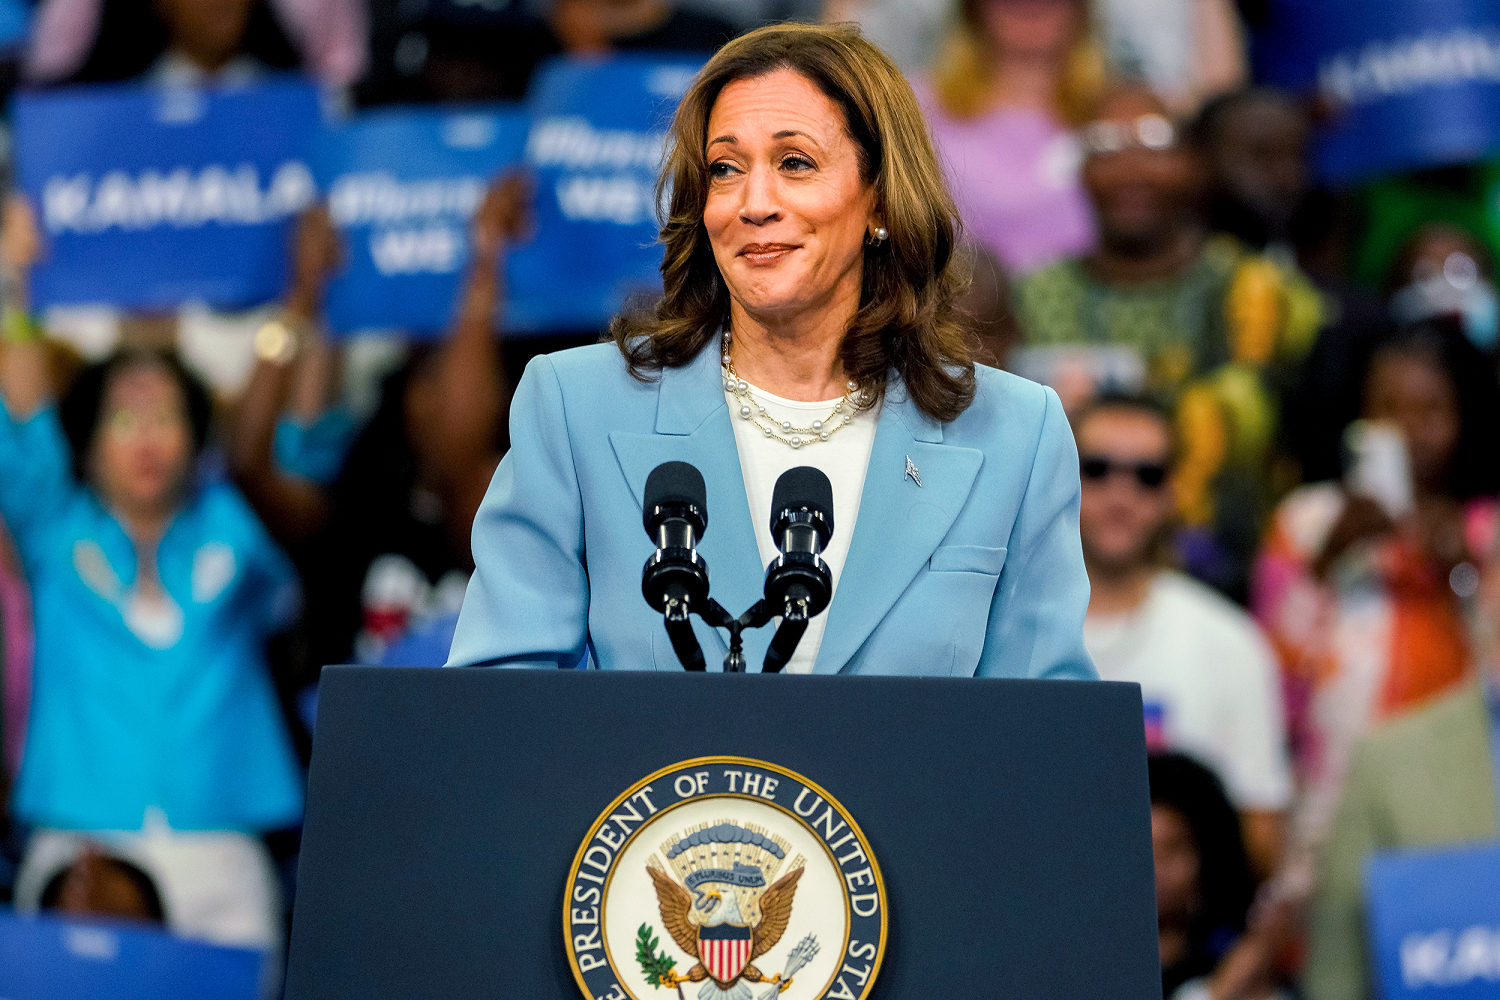 Harris derides Trump on border security at Georgia rally as GOP presses the issue